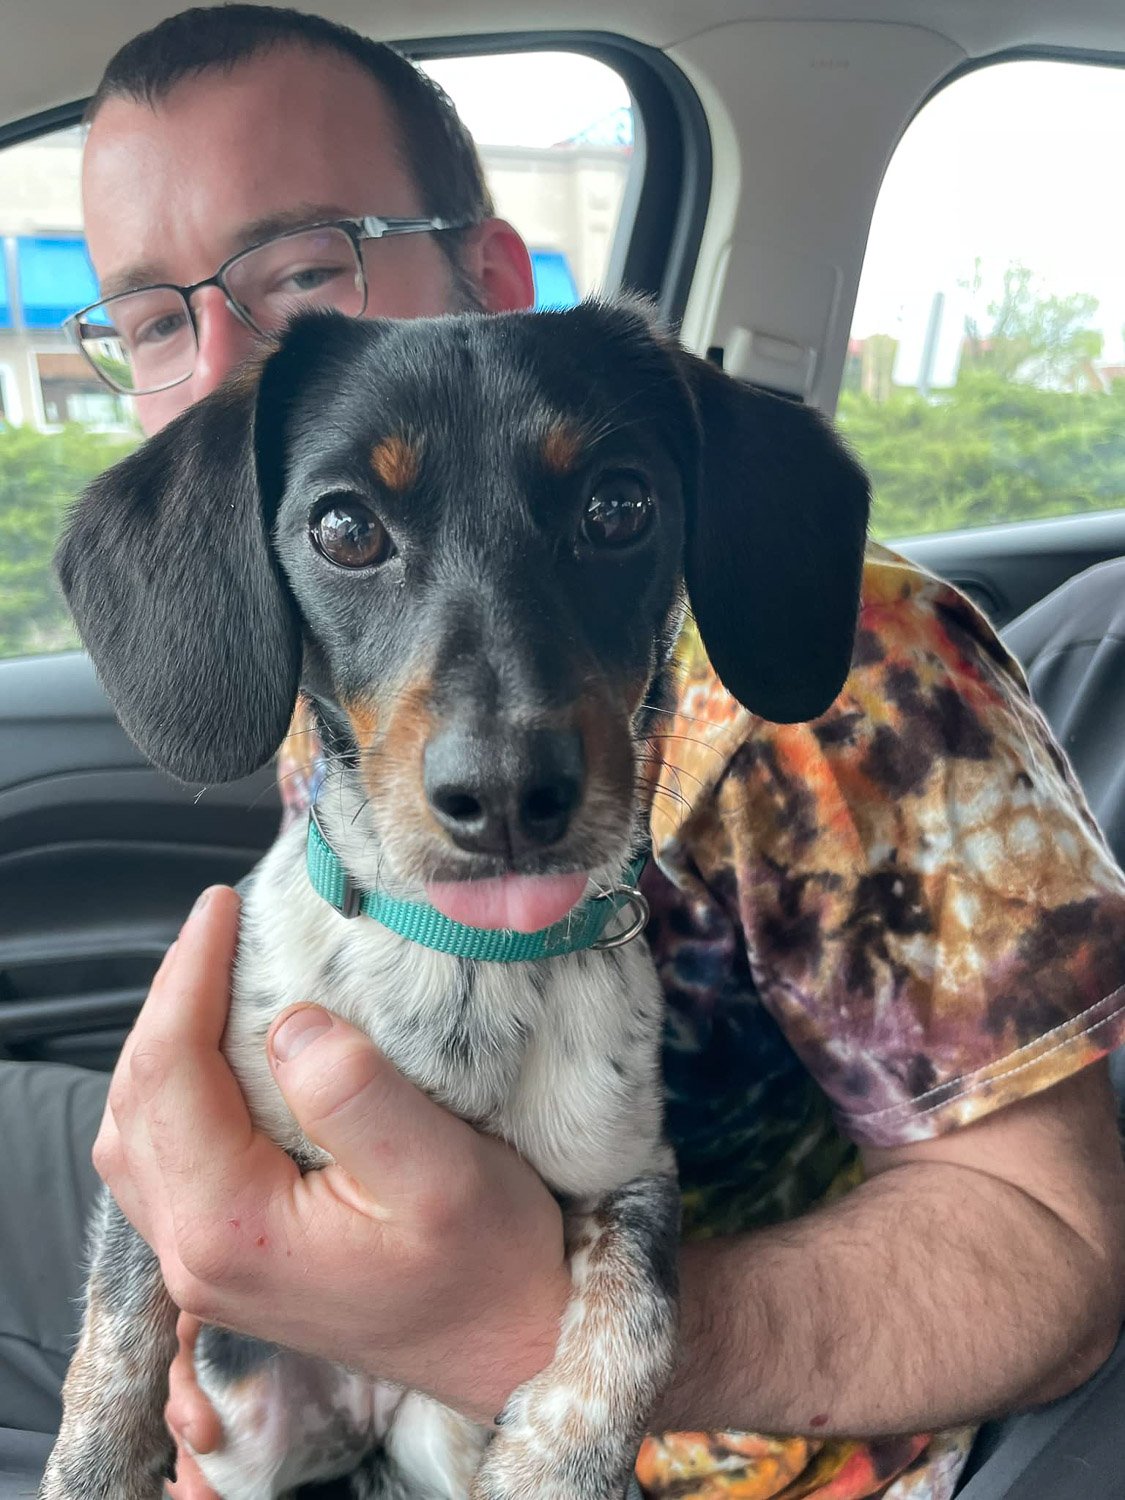 A  dachshund dog being held by its owner inside a car